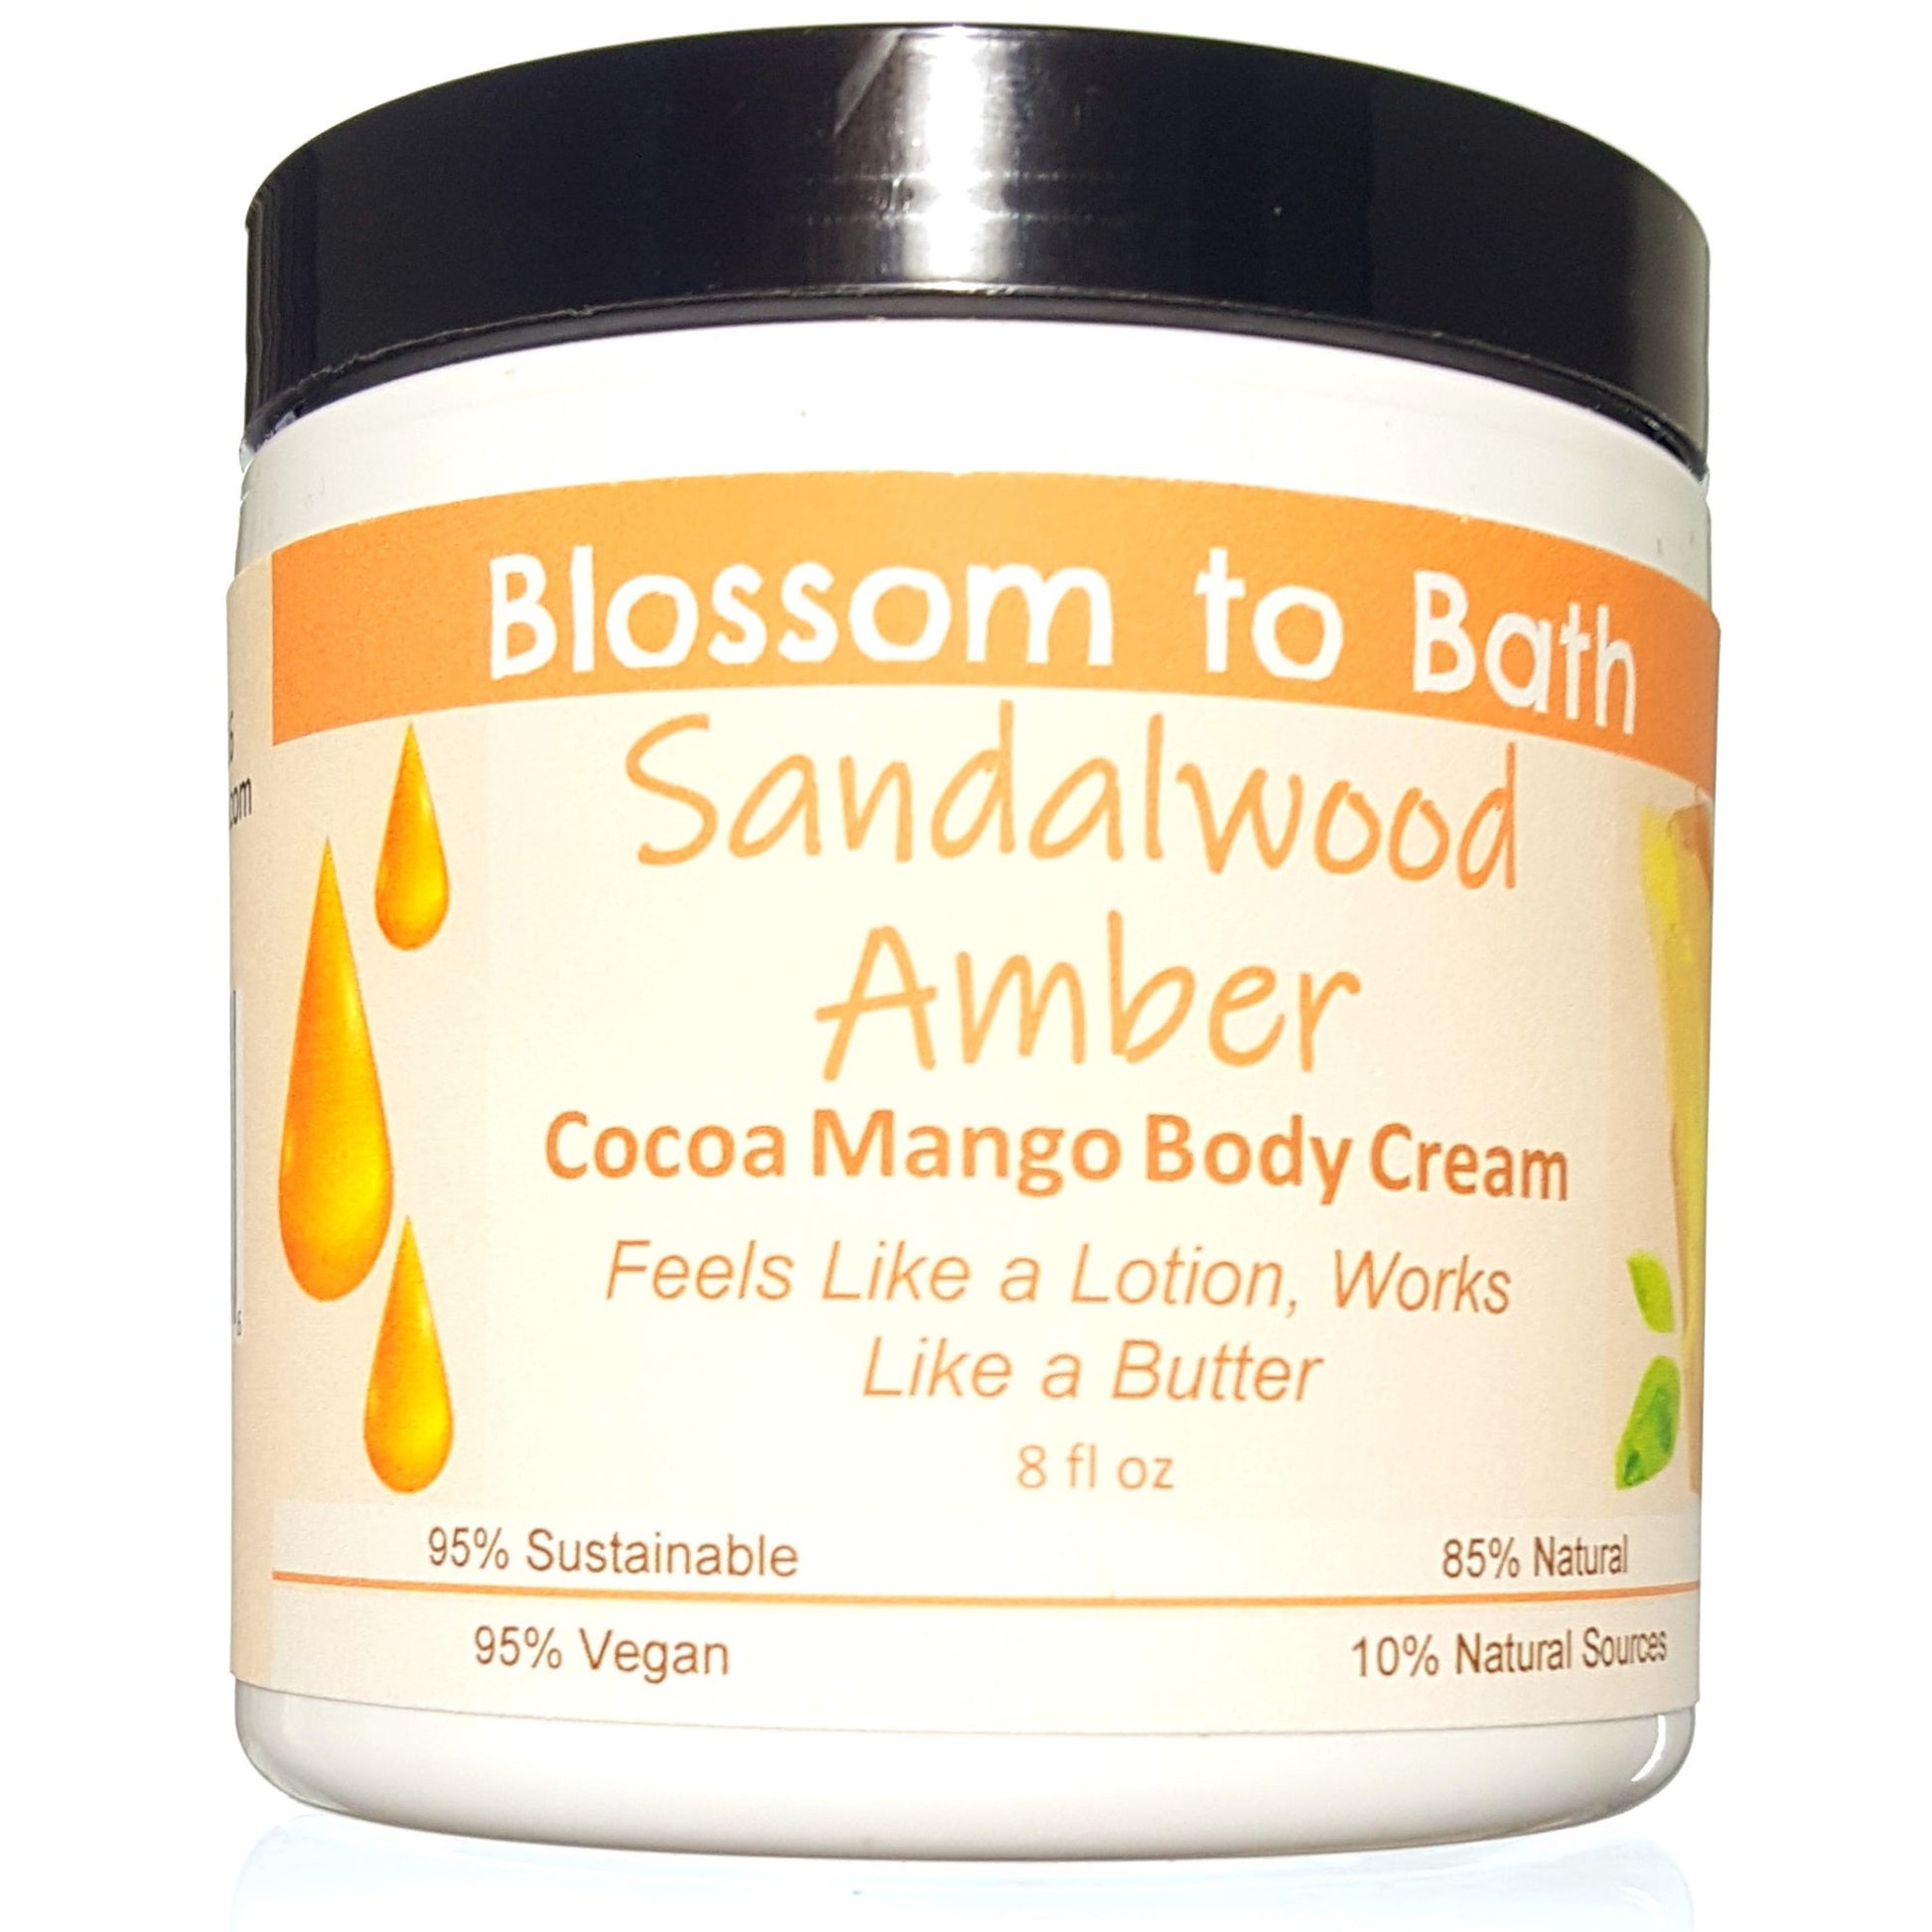 Buy Blossom to Bath Sandalwood Amber Cocoa Mango Body Cream from Flowersong Soap Studio.  Rich organic butters  soften and moisturize even the roughest skin all day  An irresistible combination of warm sandalwood and spice.